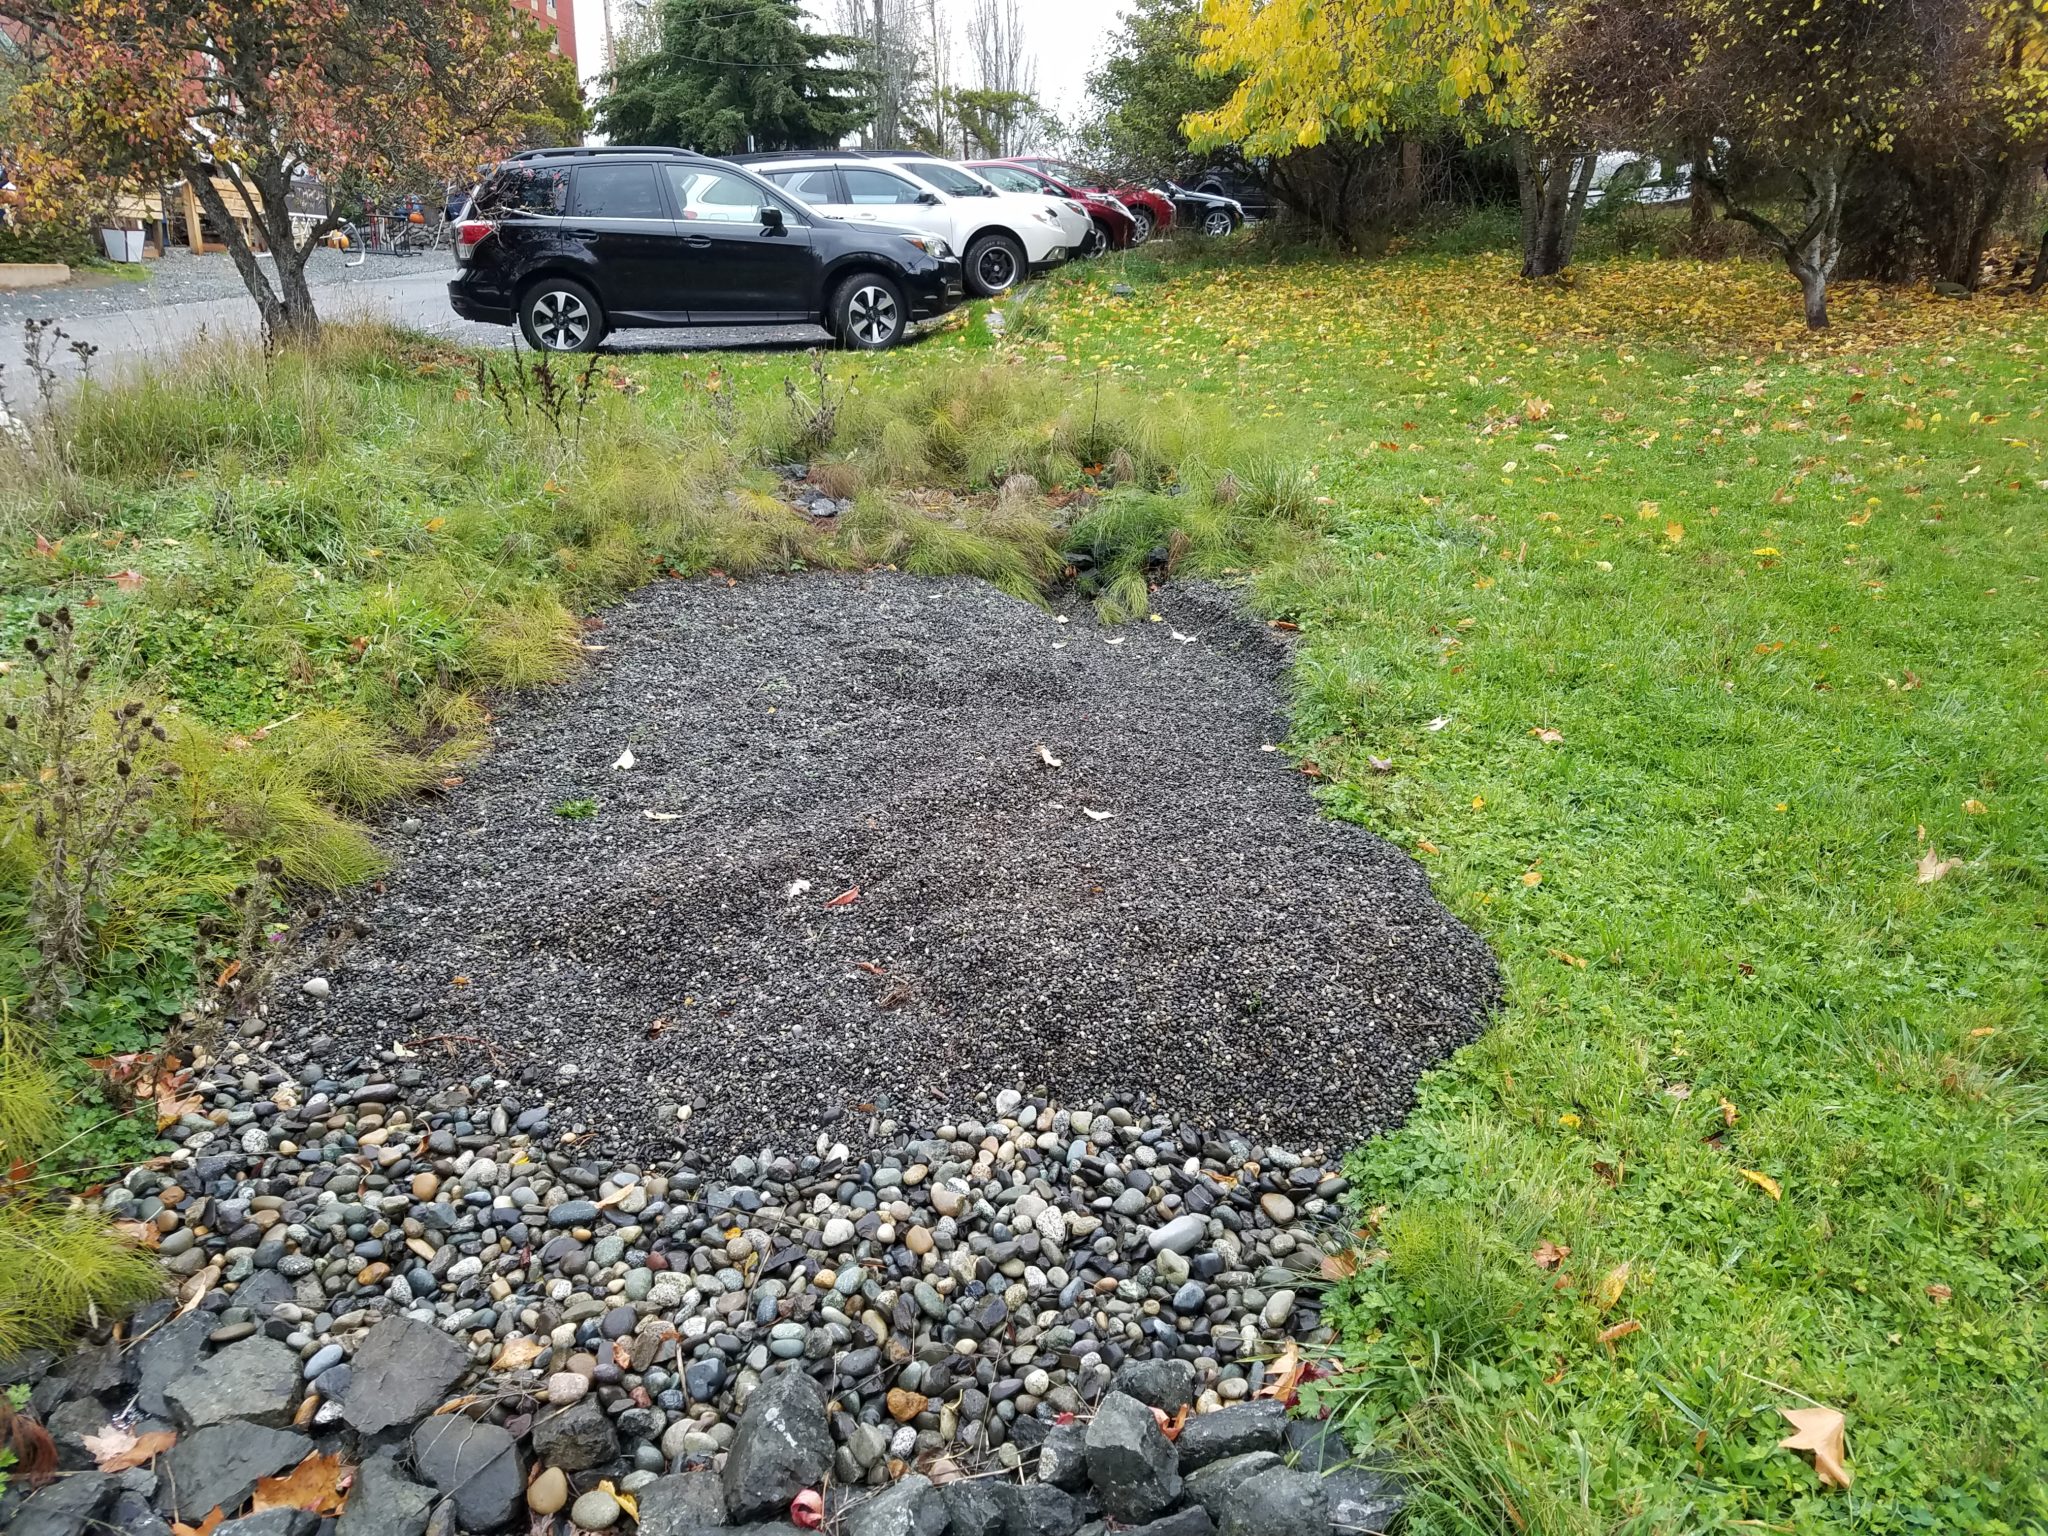 The gravel trail surface is too hard to soak up rainwater, so the runoff flows off the gravel instead and into the linear rain garden on the left.